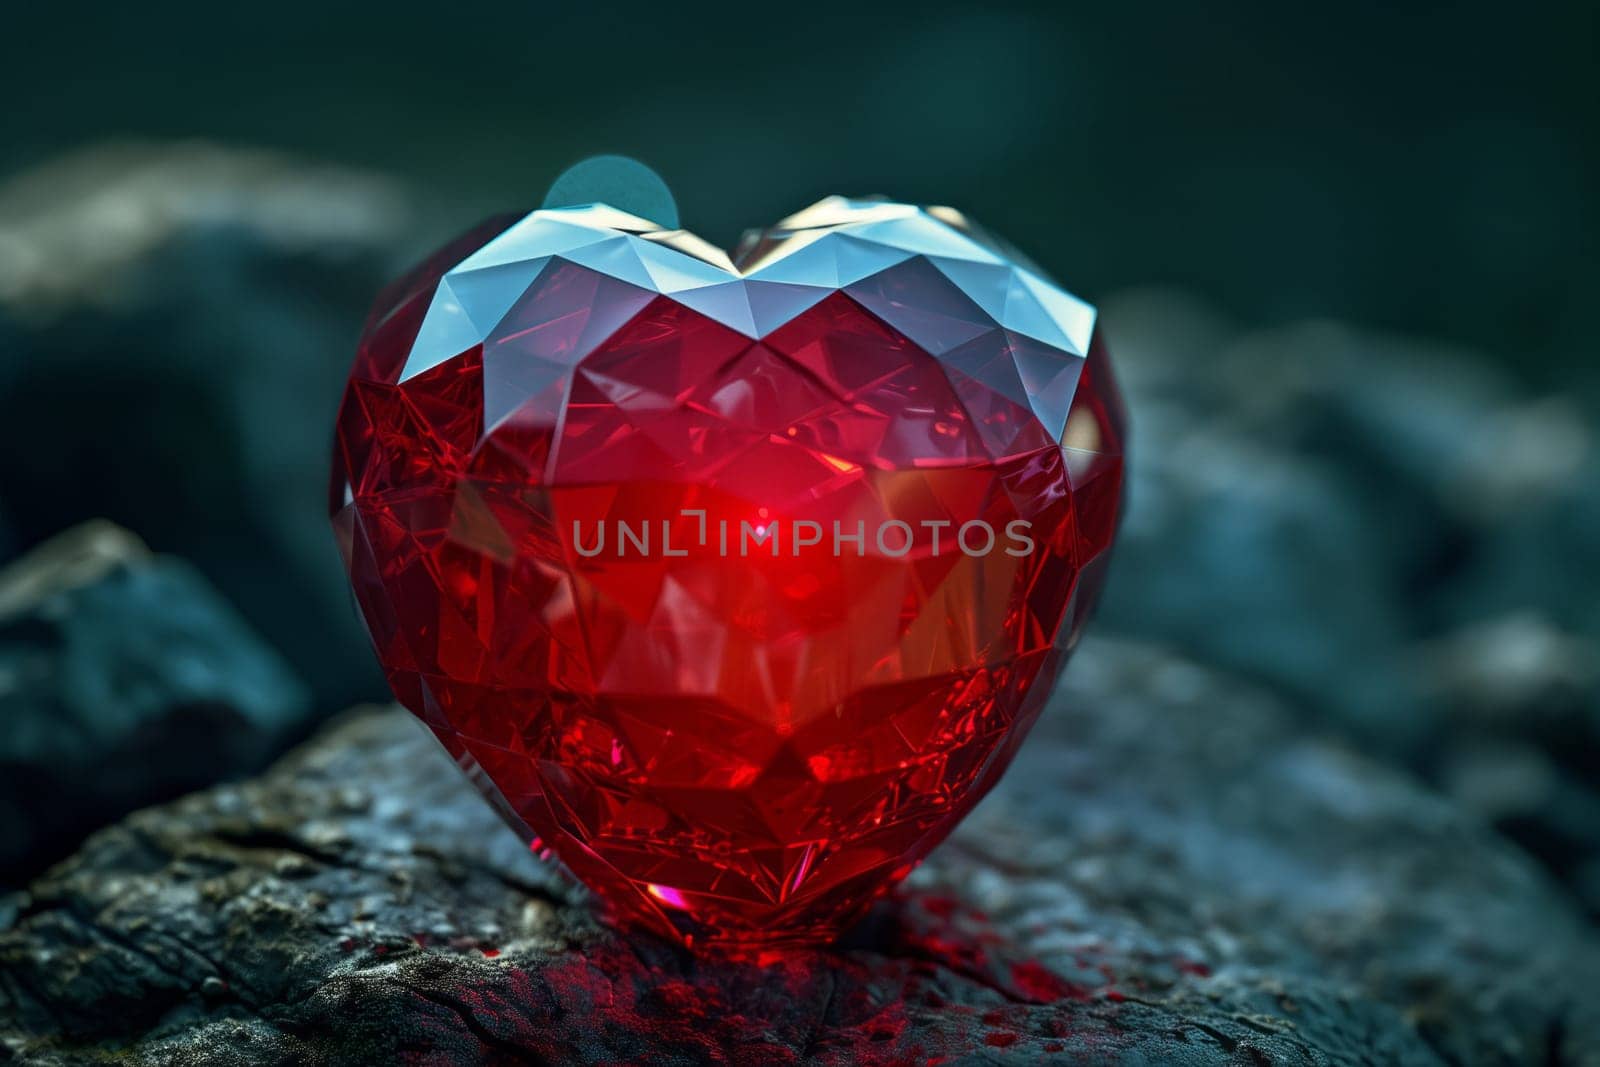 A fashion accessory, a red heartshaped pendant made of gemstone, is resting on a natural rock. The rock is gas and electric blue, contrasting with the magenta stone